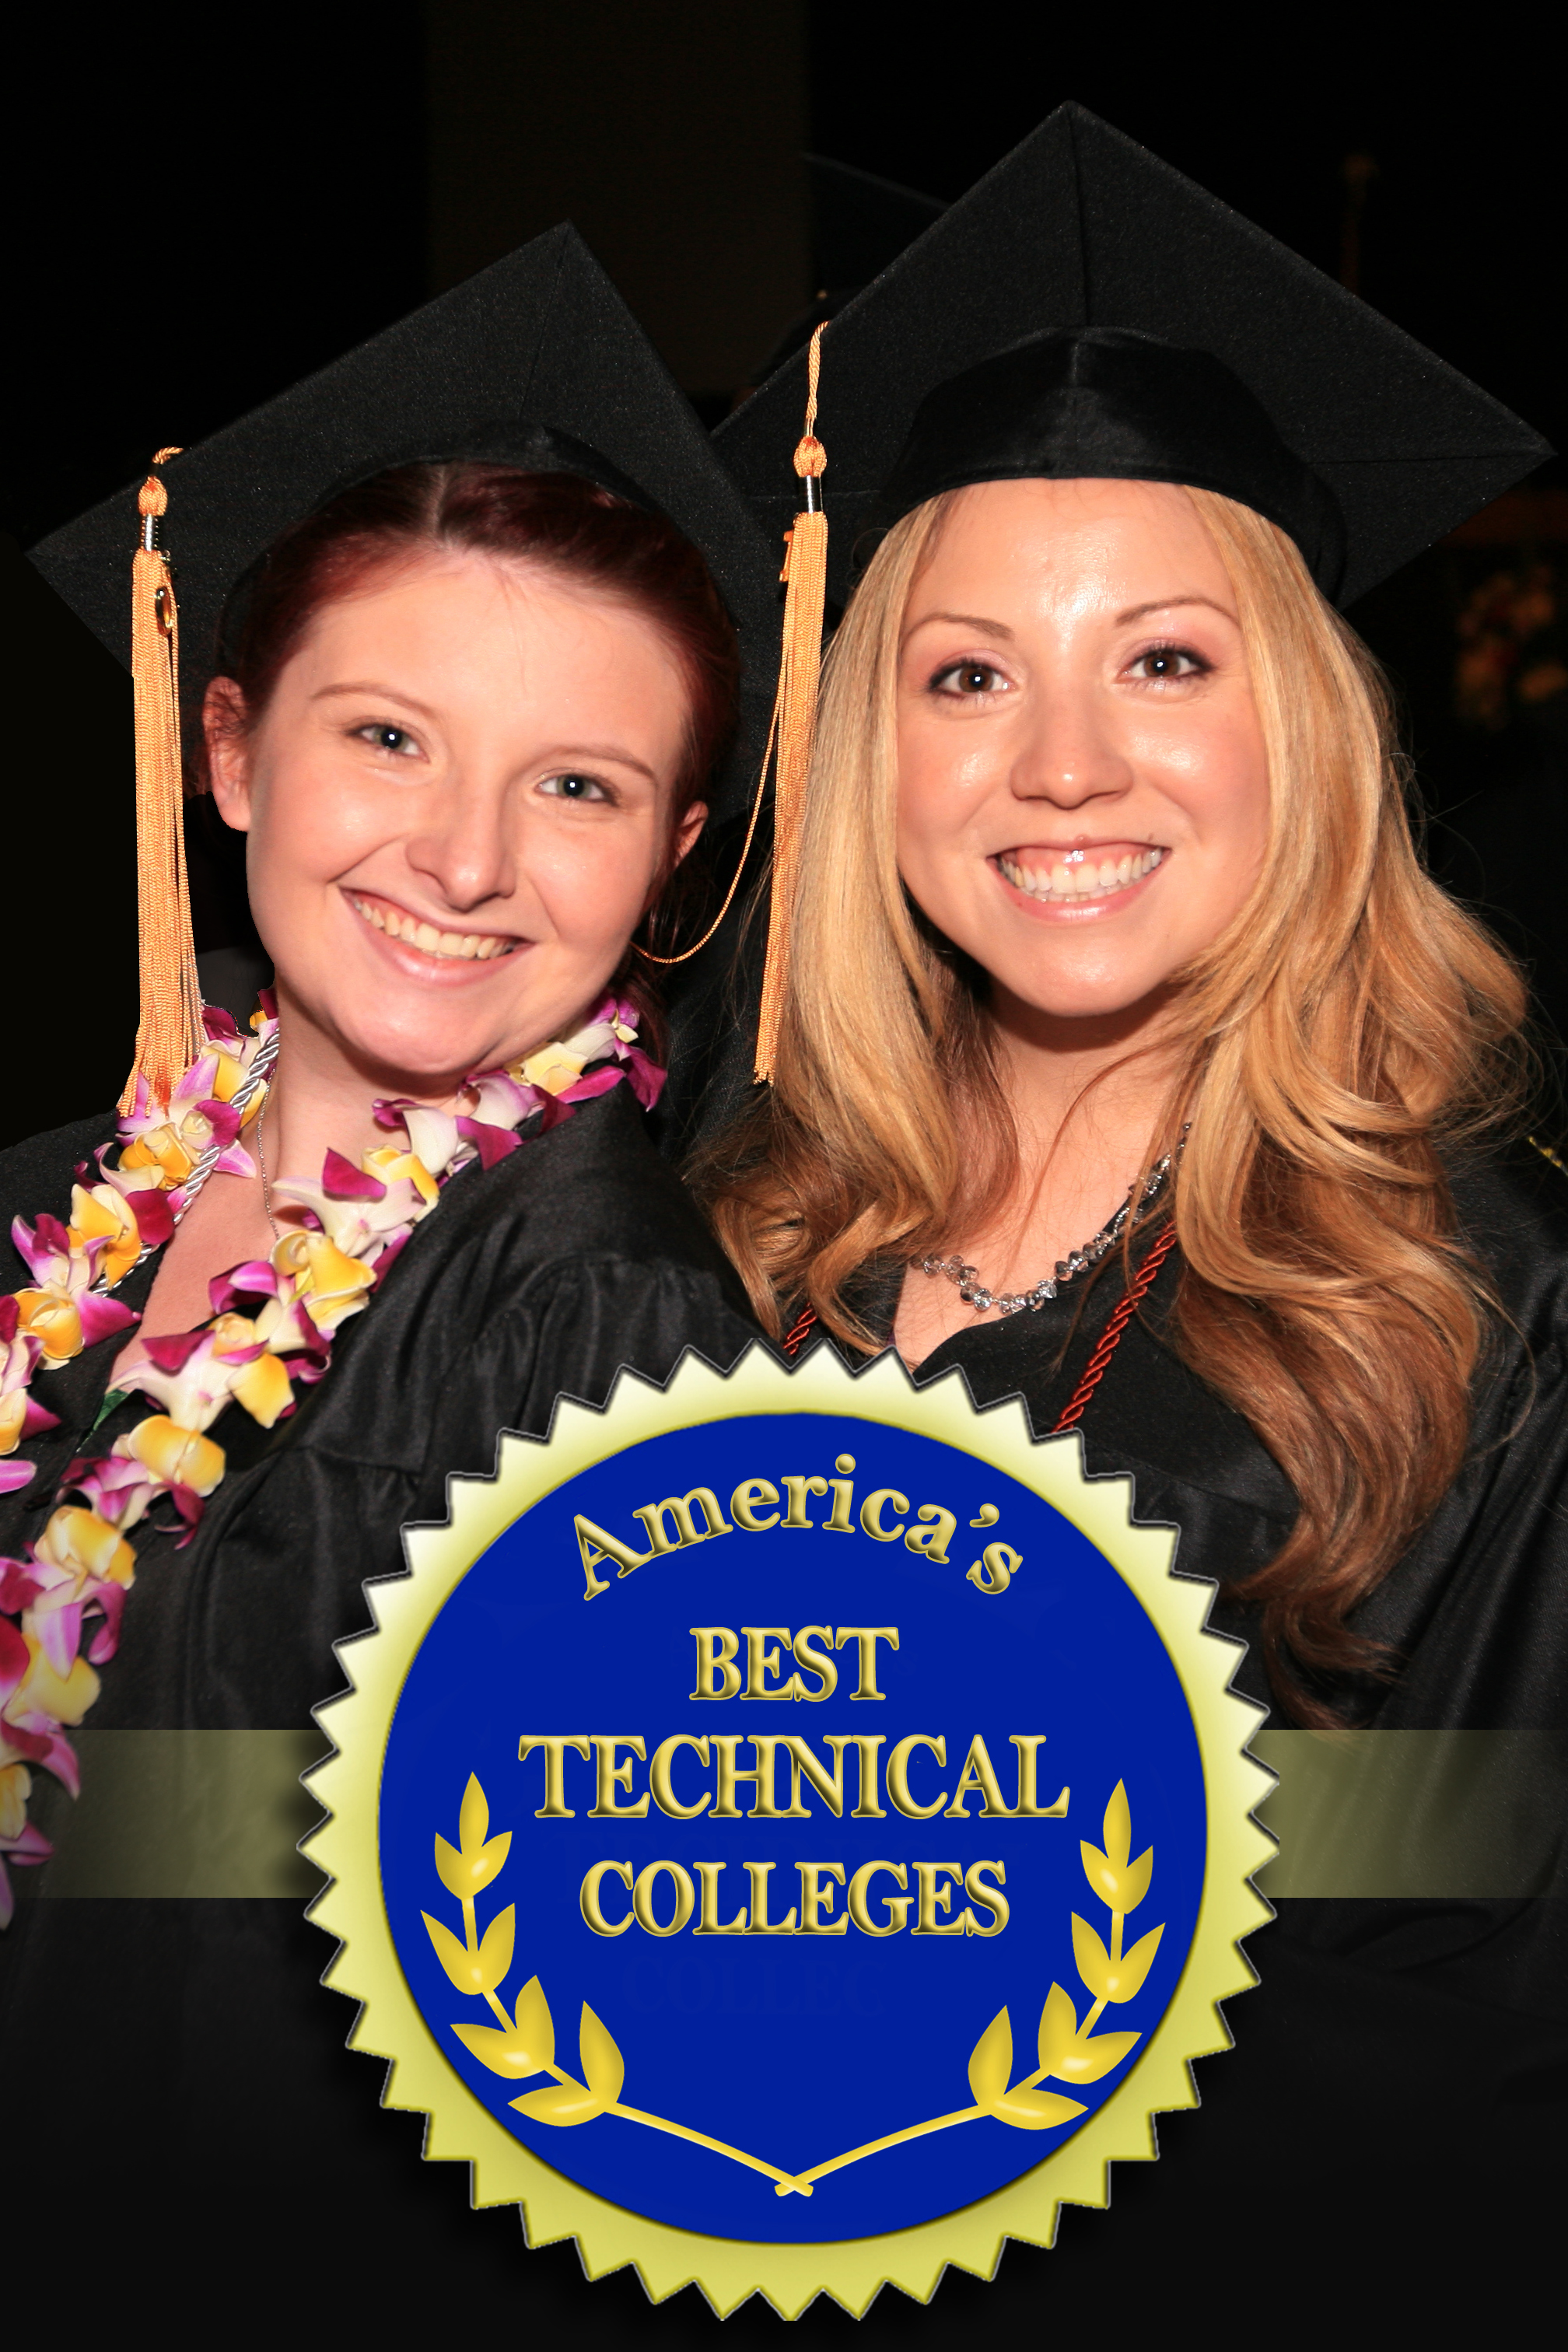  Stanbridge College Recognized as One of America’s Best Technical Colleges  